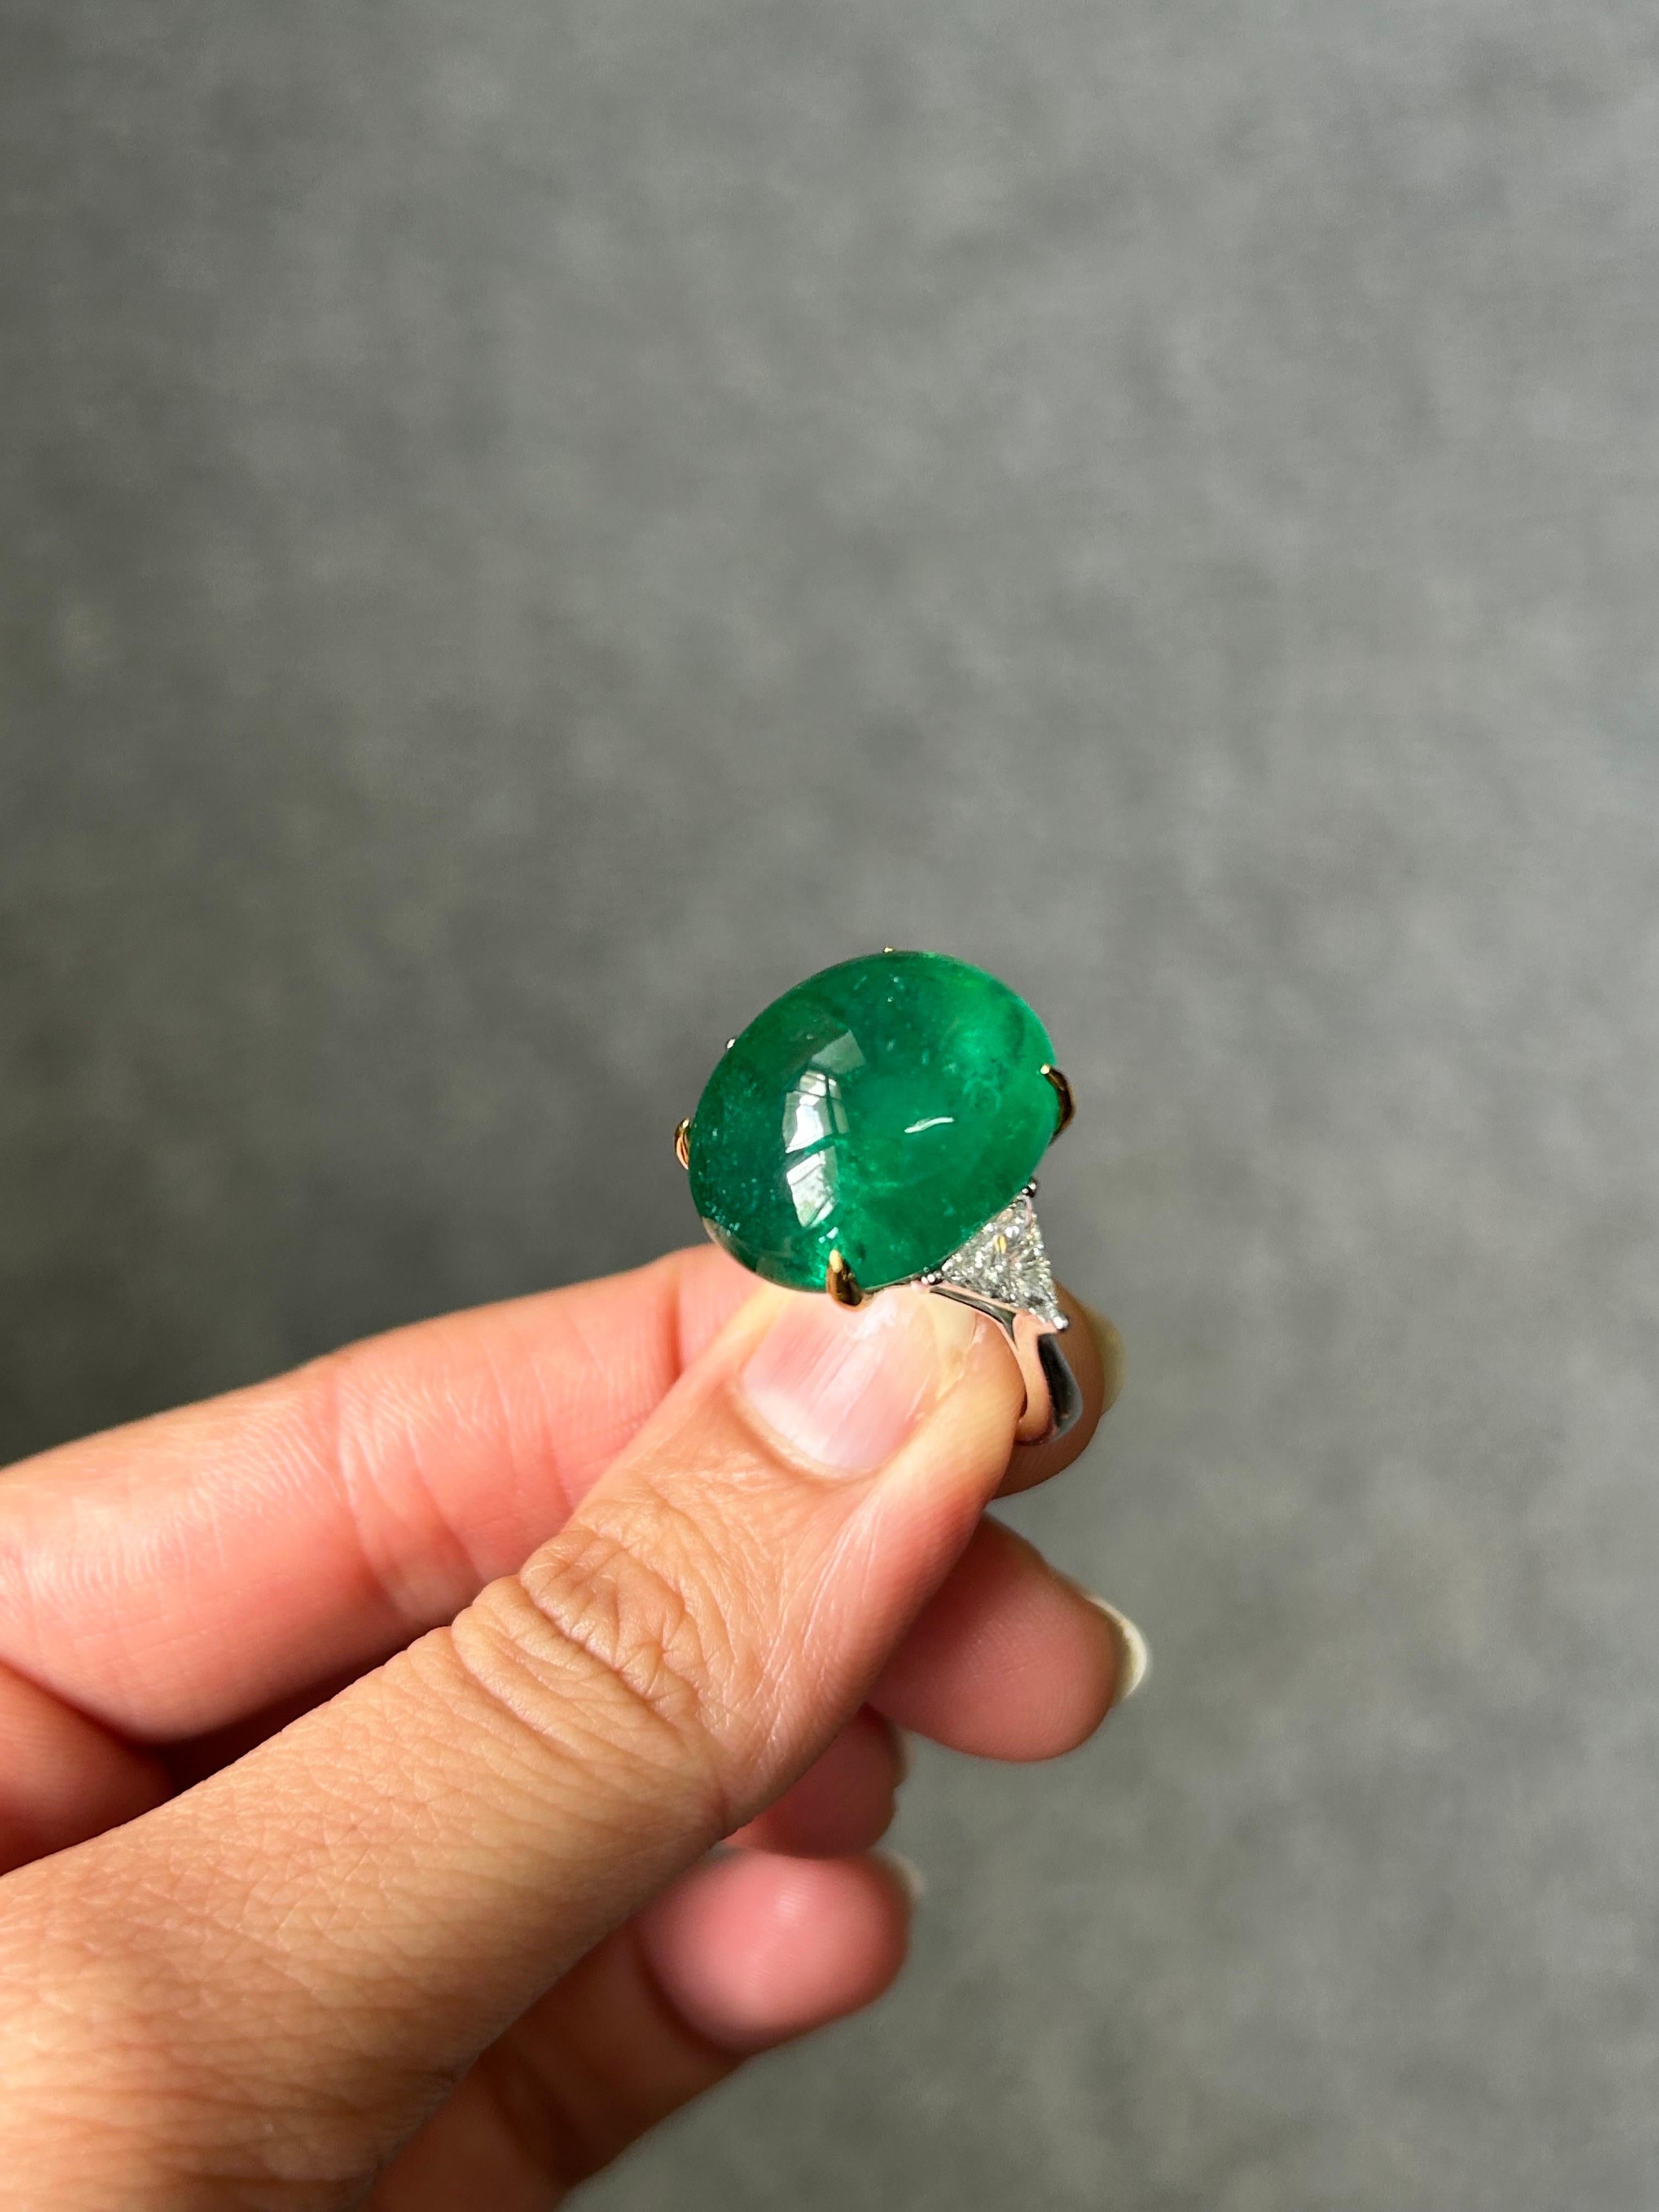 A stunning certified 20.47 carat, Zambian Emerald Cabochon center stone  with 0.71 carat VS quality trillion side stones, set in 18K White Gold. The center stone has a beautiful luster, and vivid green color and great transparency. Currently sized